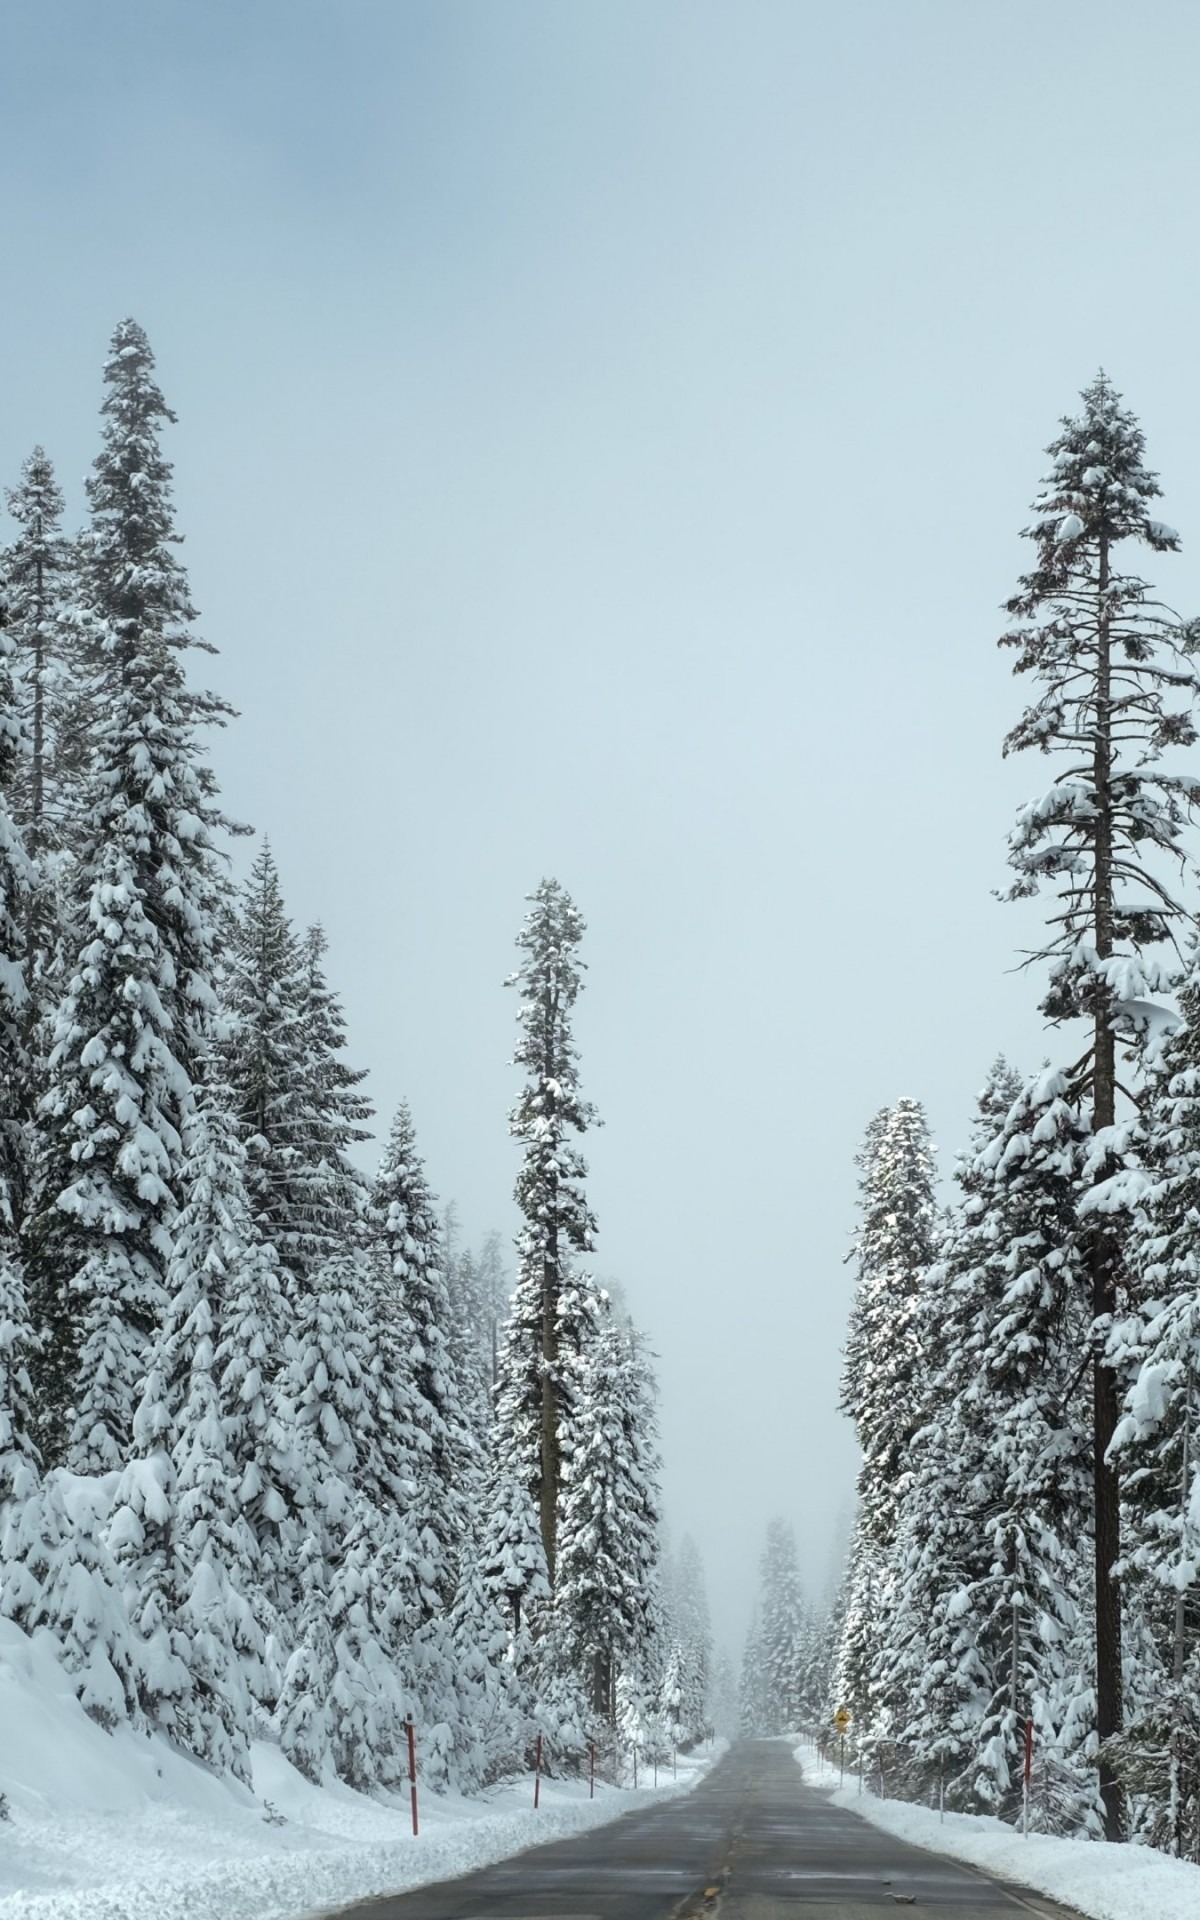 Download 10x19 Snow Road Trees Winter Wallpapers Shaver Lake Winter Hikes Hd Wallpaper Backgrounds Download